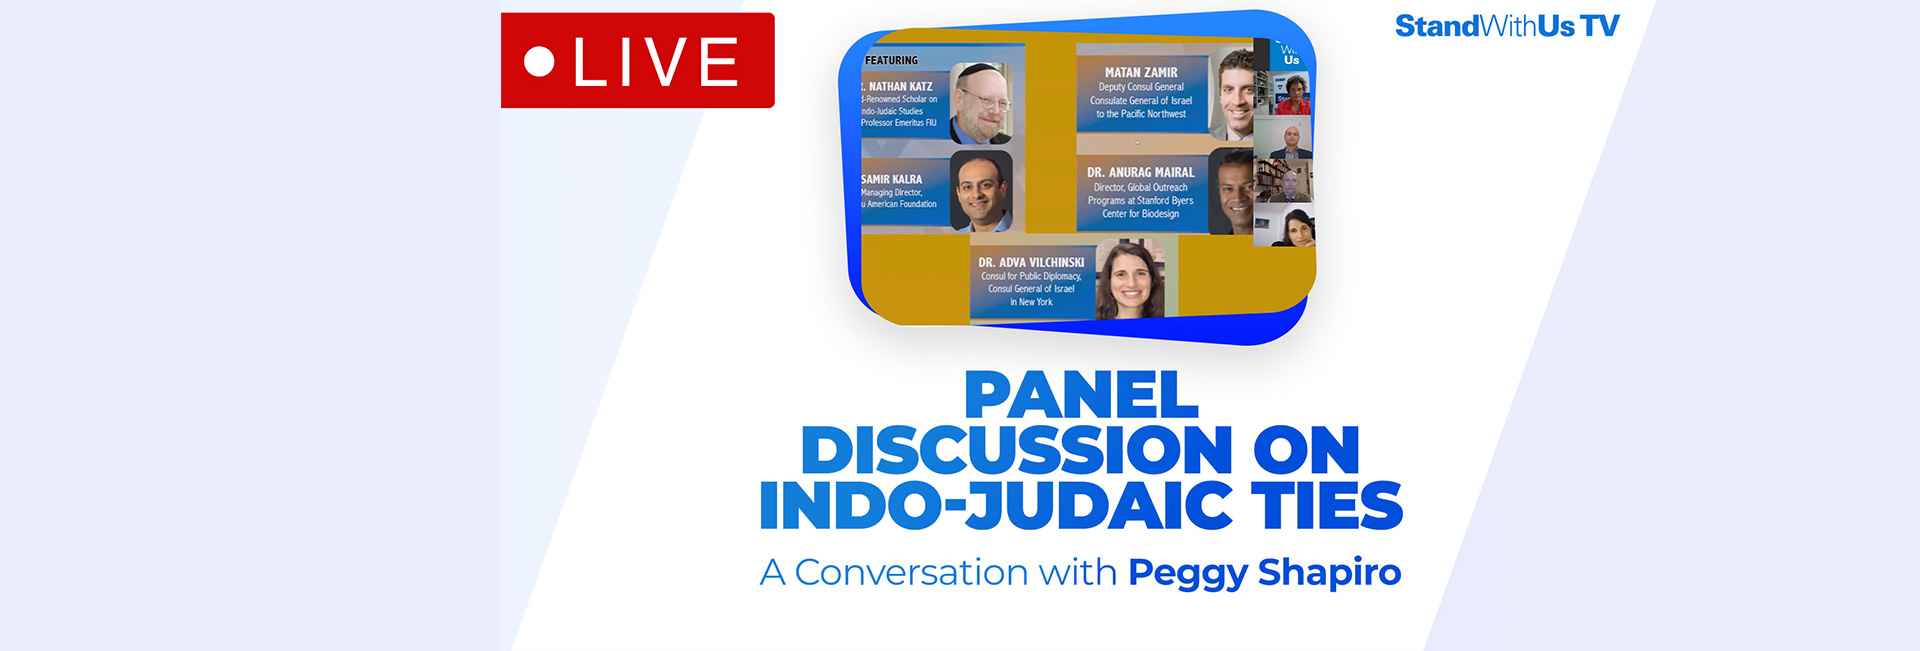 Panel discussion on Indo-Judaic Ties